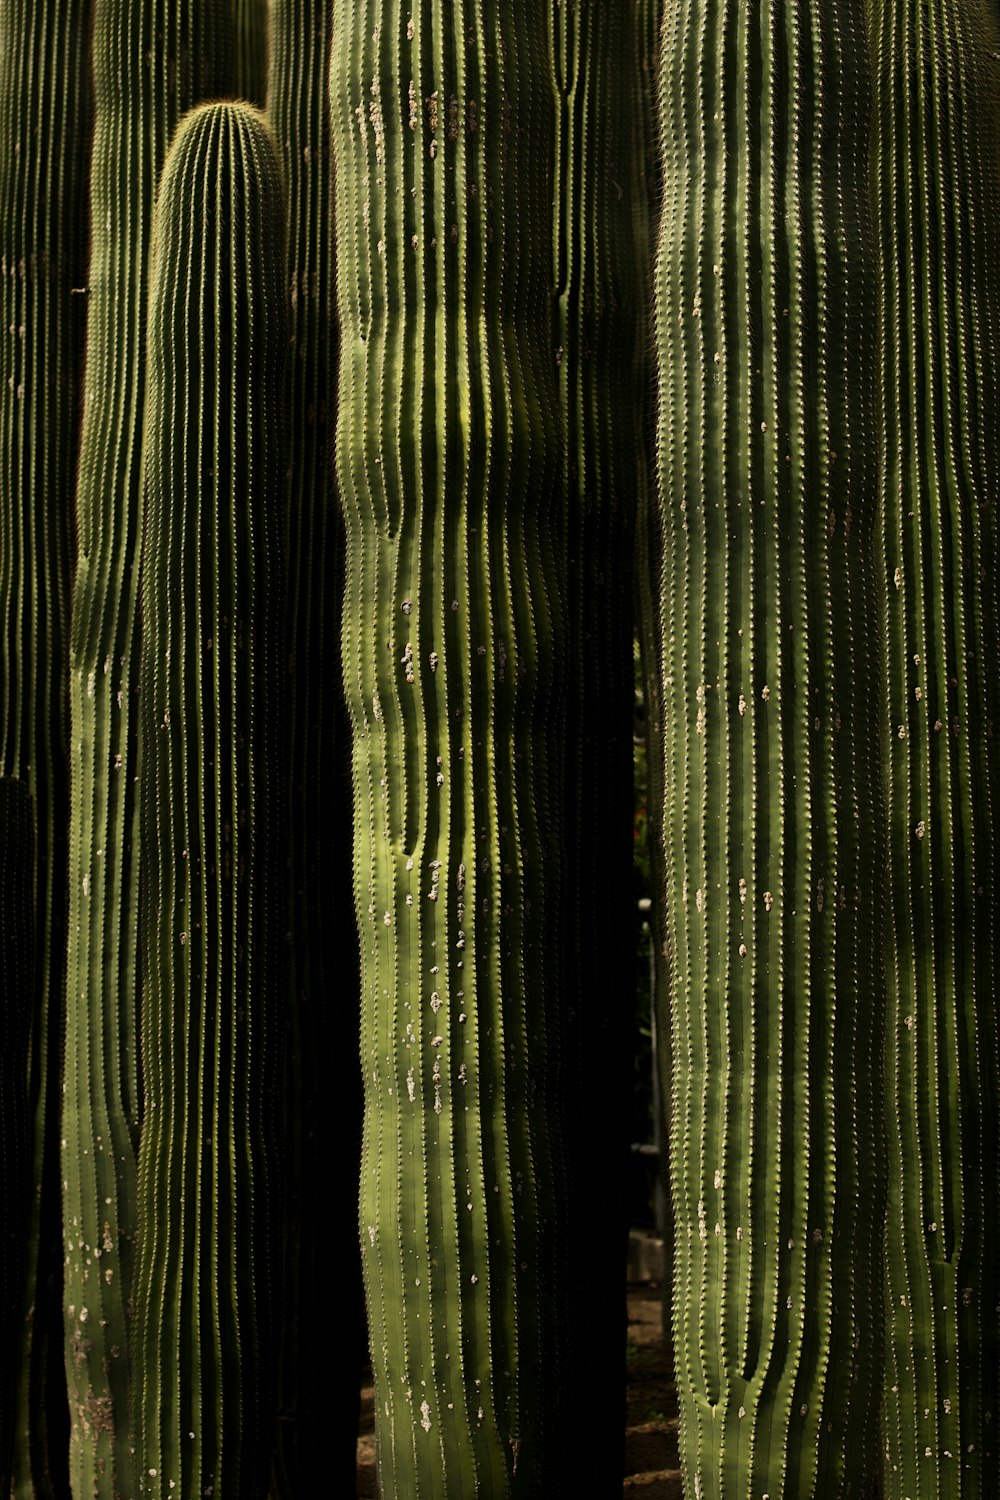 a group of large green cactus plants next to each other